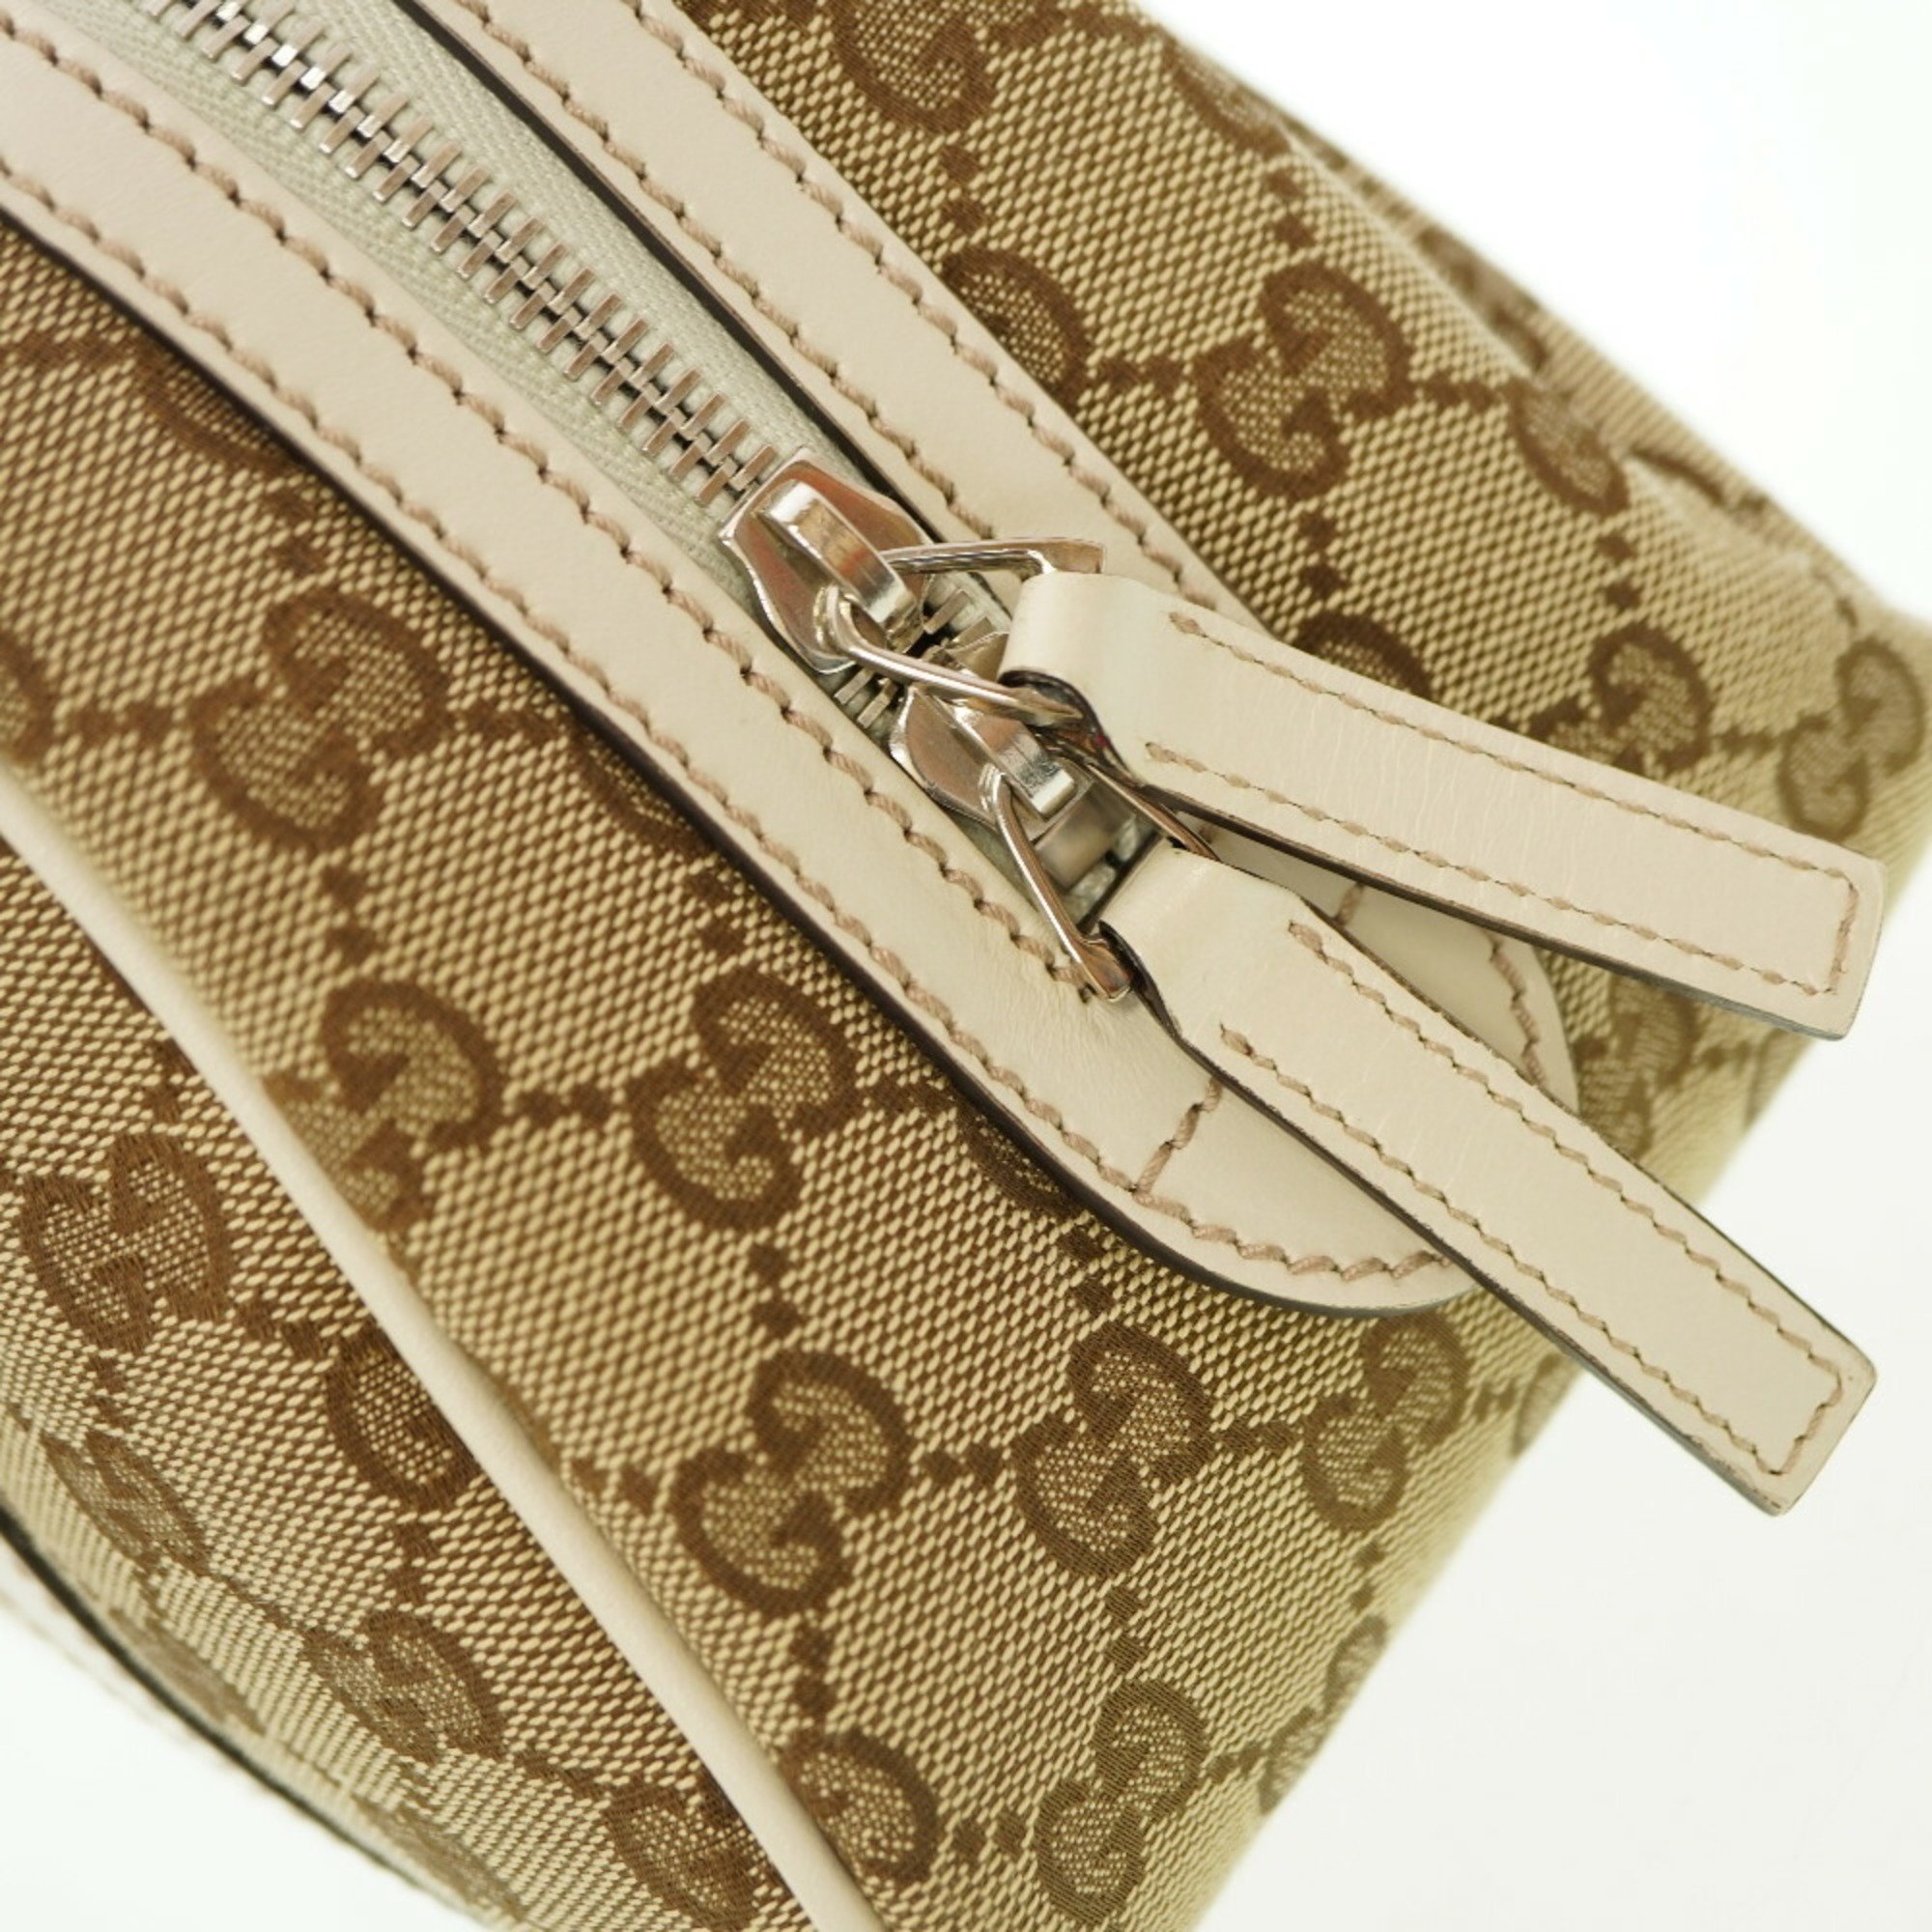 Gucci GG Twins 232958 Shoulder Bag Canvas/Leather Brown 0035GUCCI 6A0035AG5